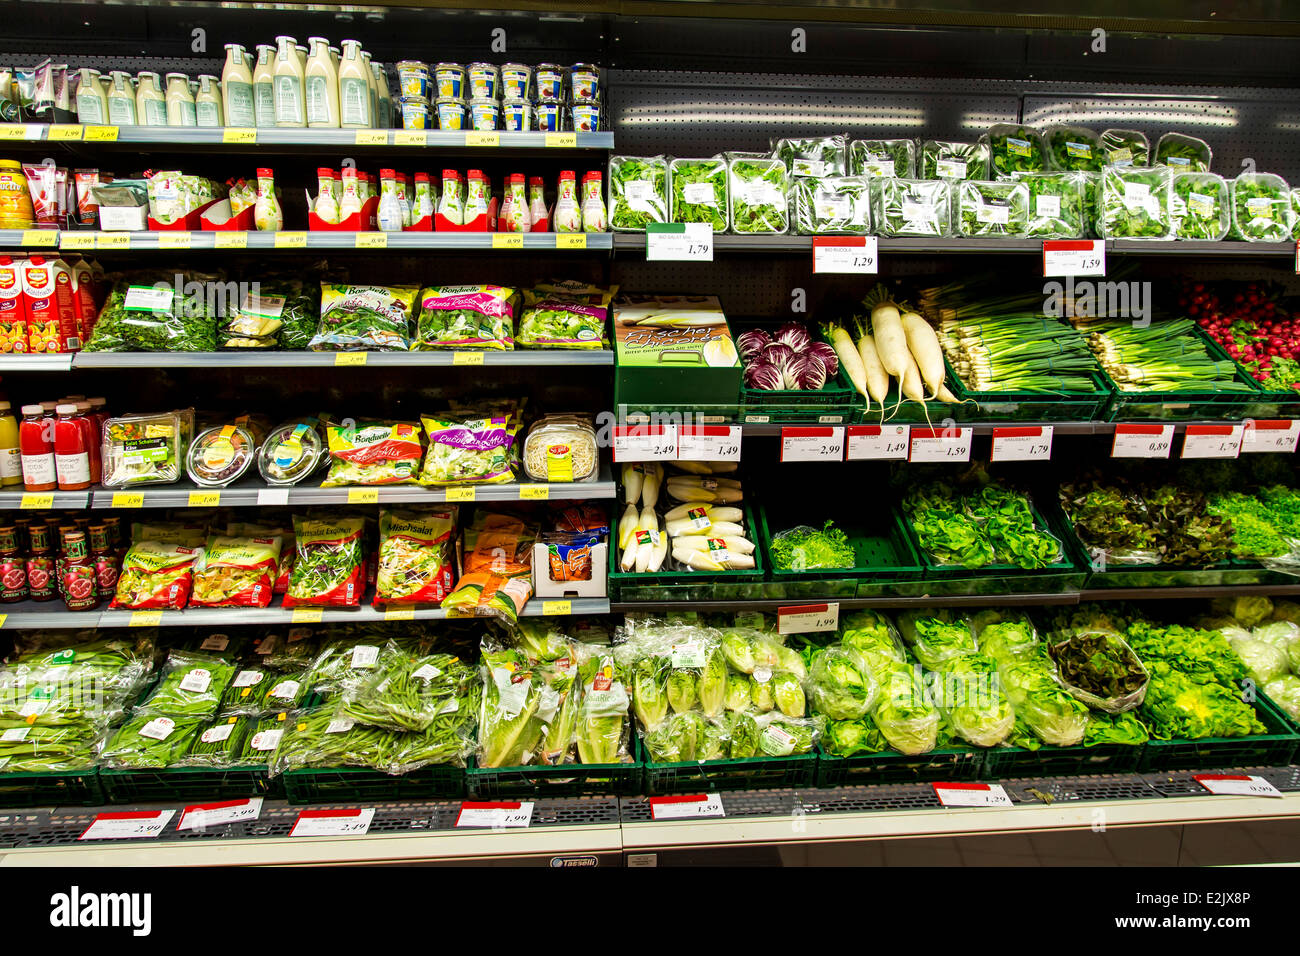 Shelf with food in a supermarket. Refrigerated, fruit juices, salad, vegetables, packed in plastic, Stock Photo